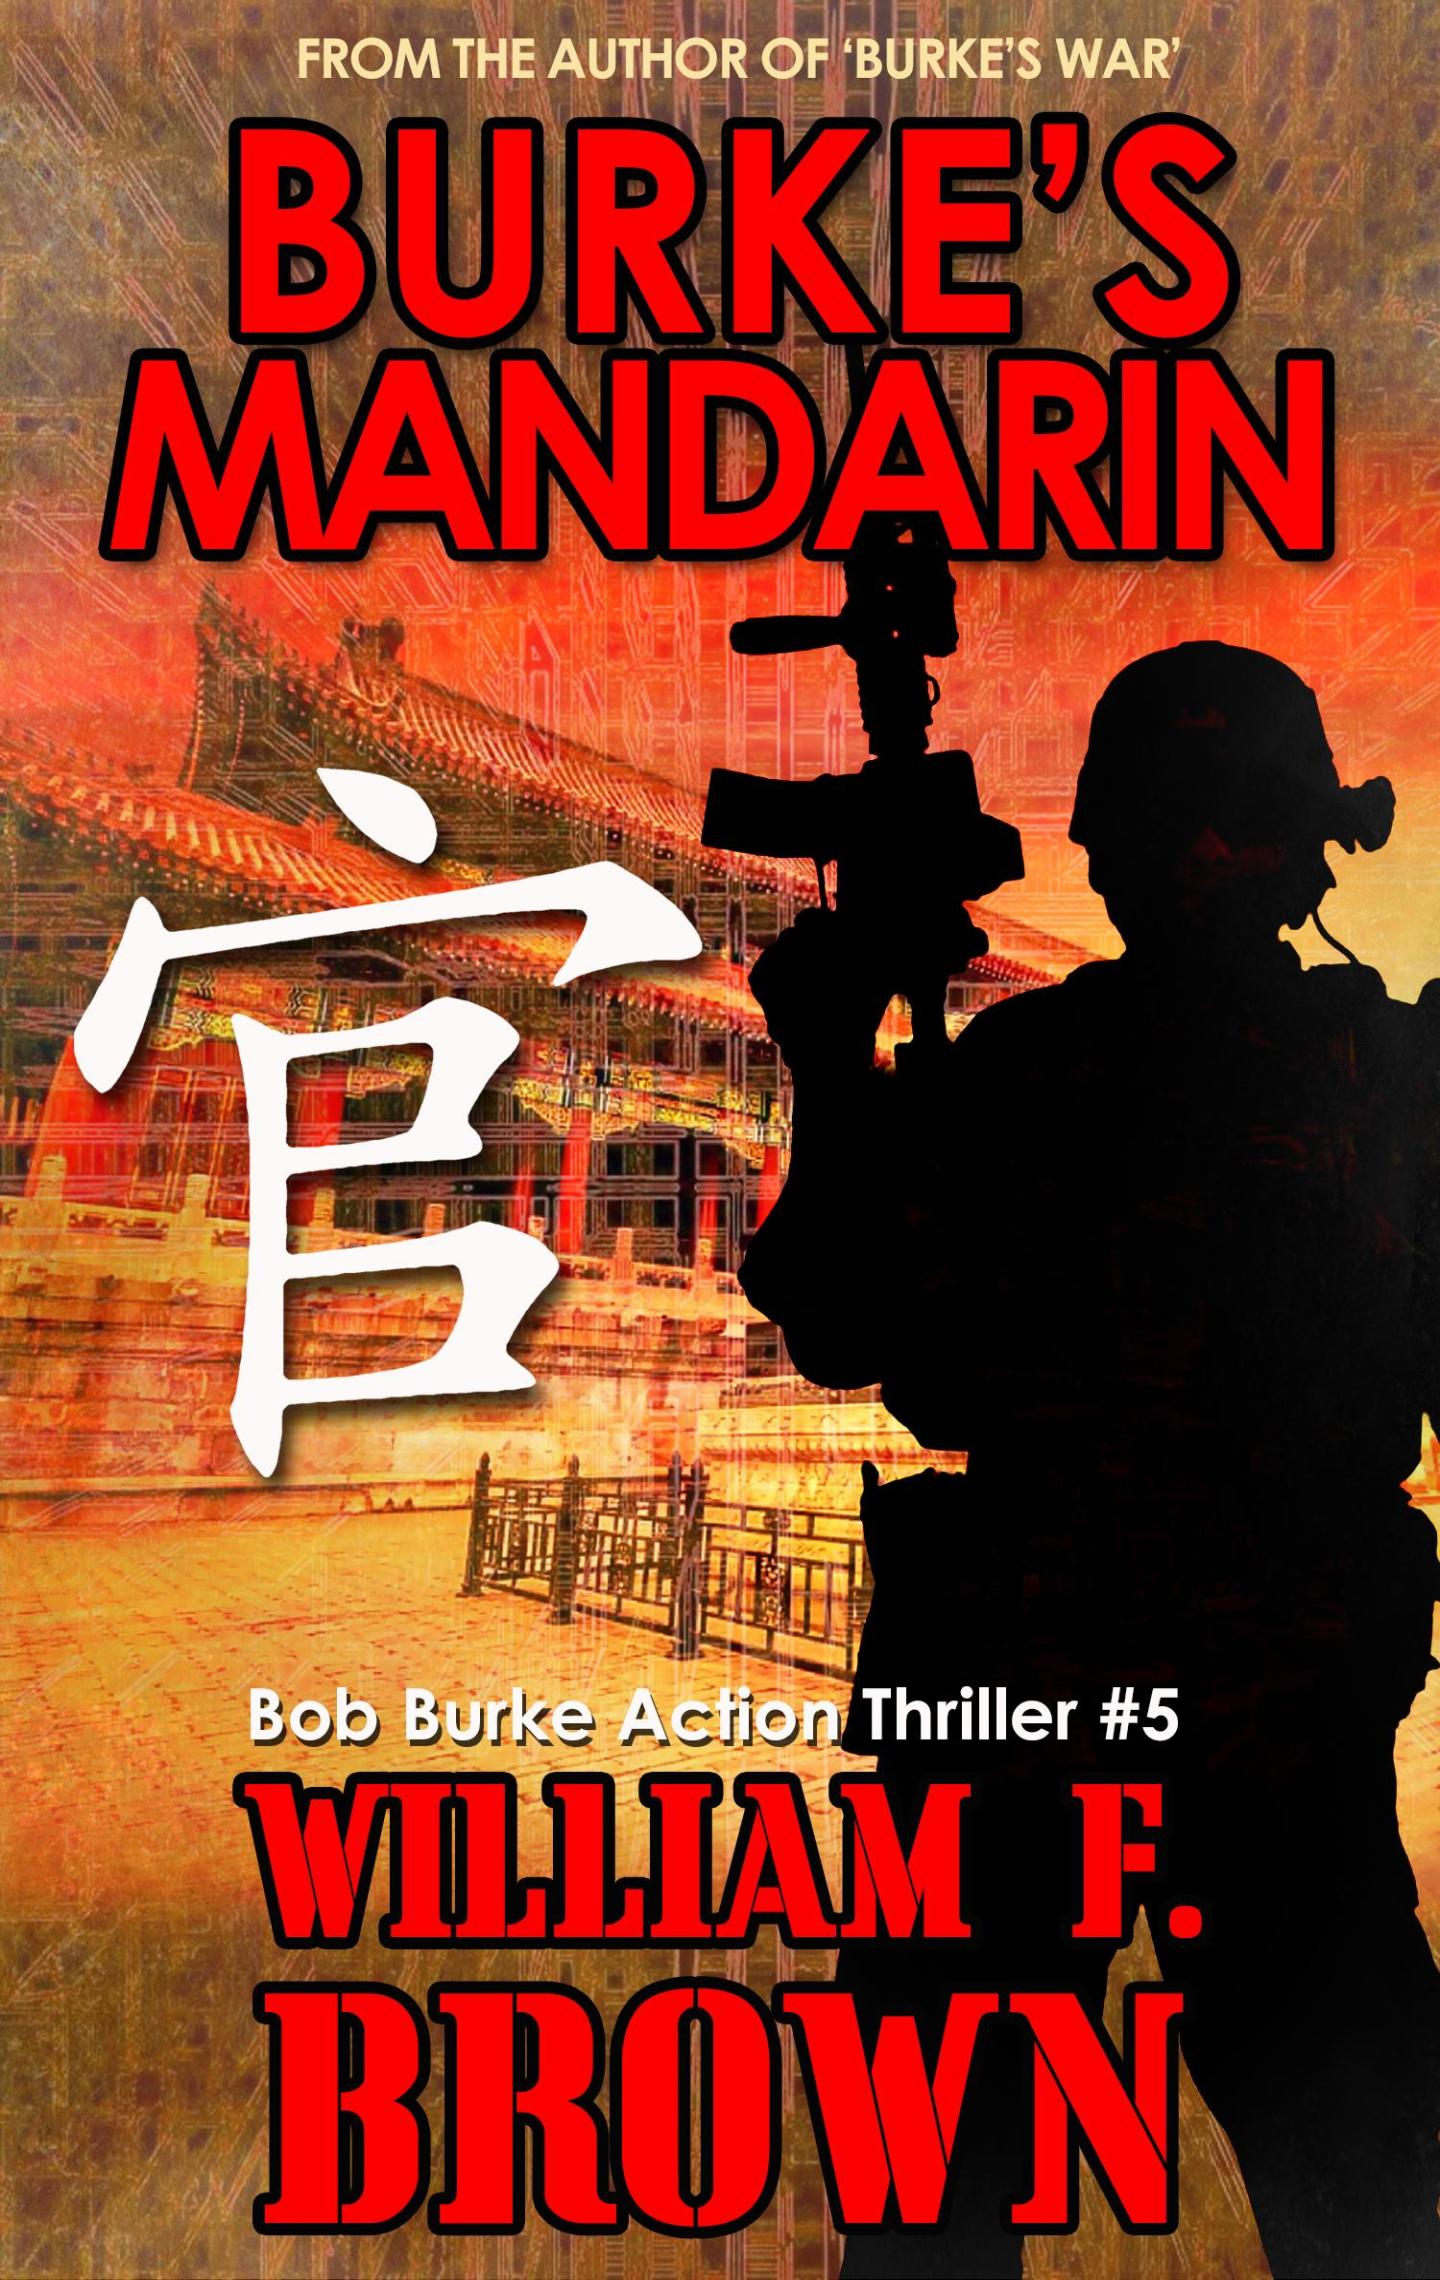 Burke’s Mandarin is now Available in Kindle, Paperback, and Hardback